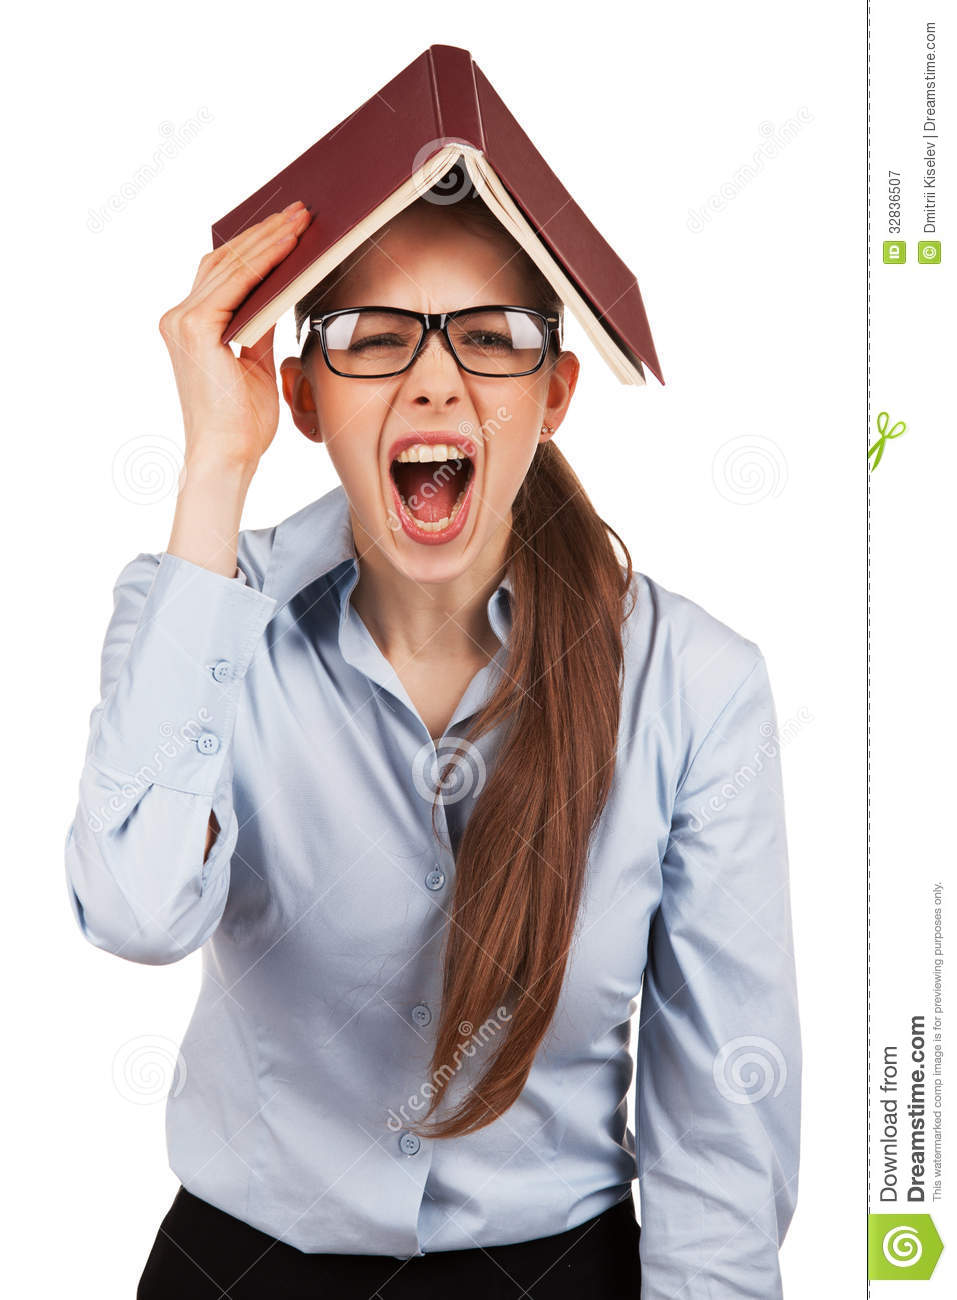 Nervous Girl With Book Royalty Free Stock Photography   Image